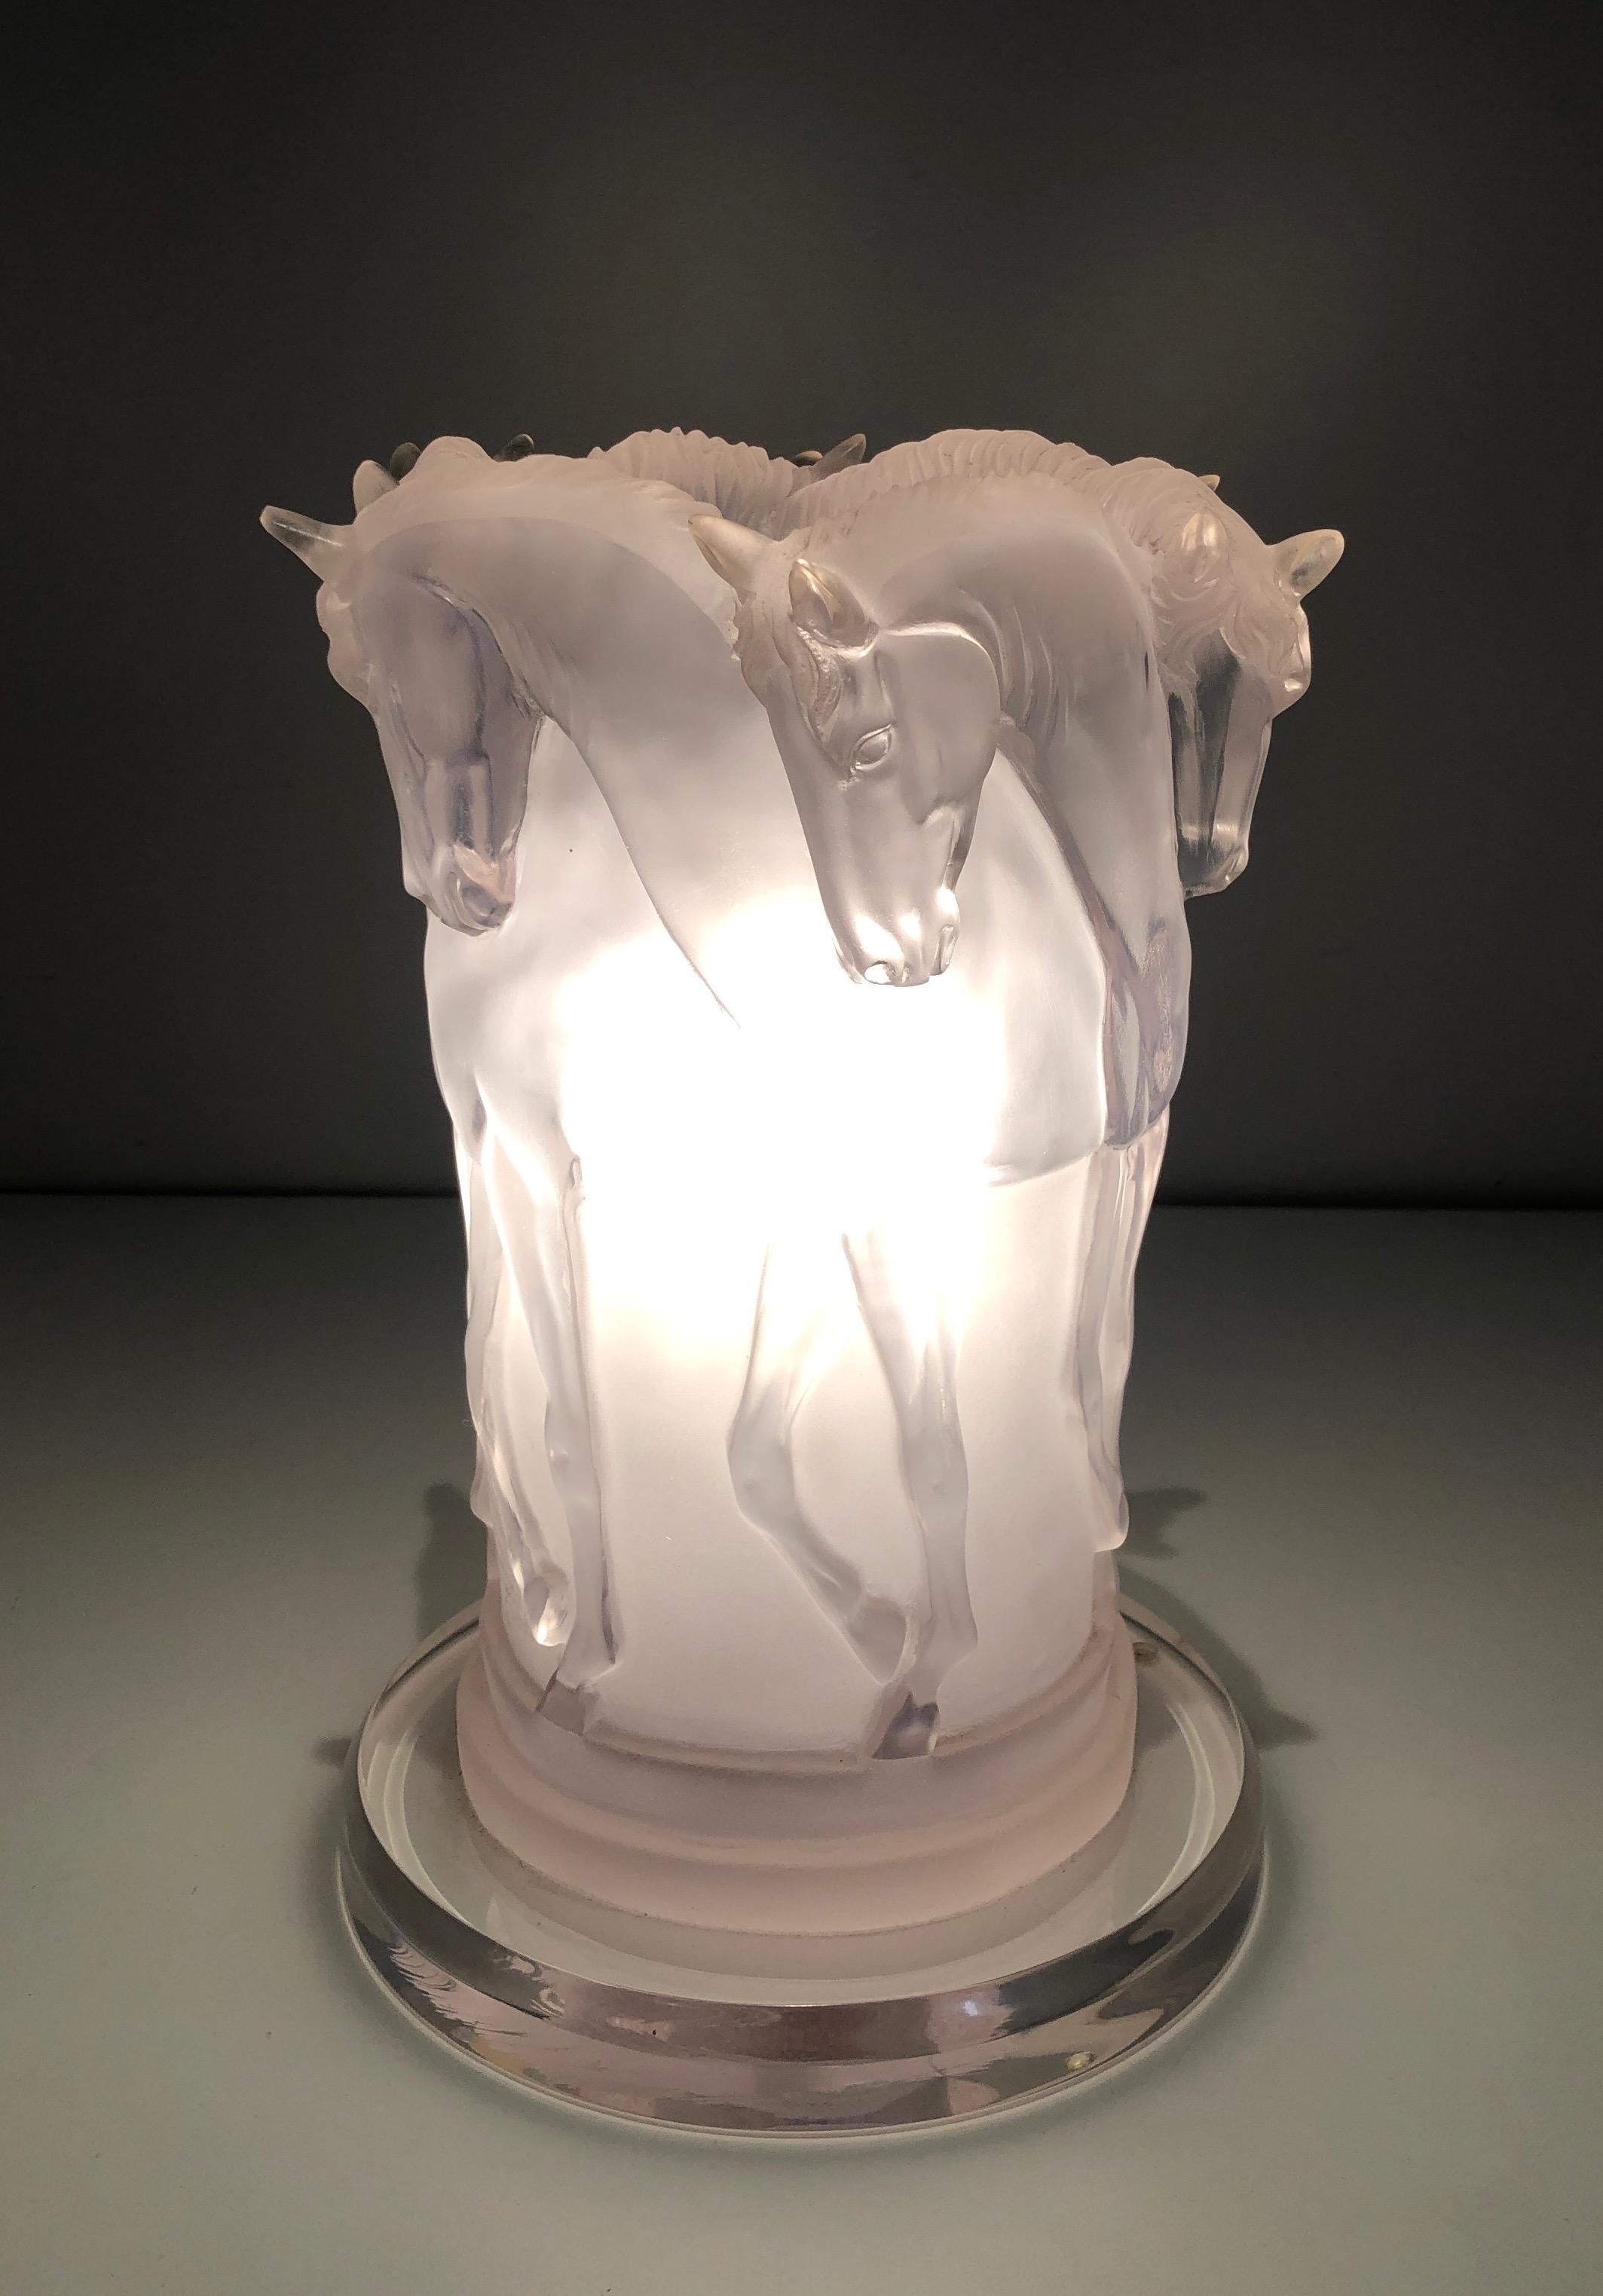 Lucite Horses Table Lamp, French Work, in the Style of Maison Lalique, 1970's For Sale 10